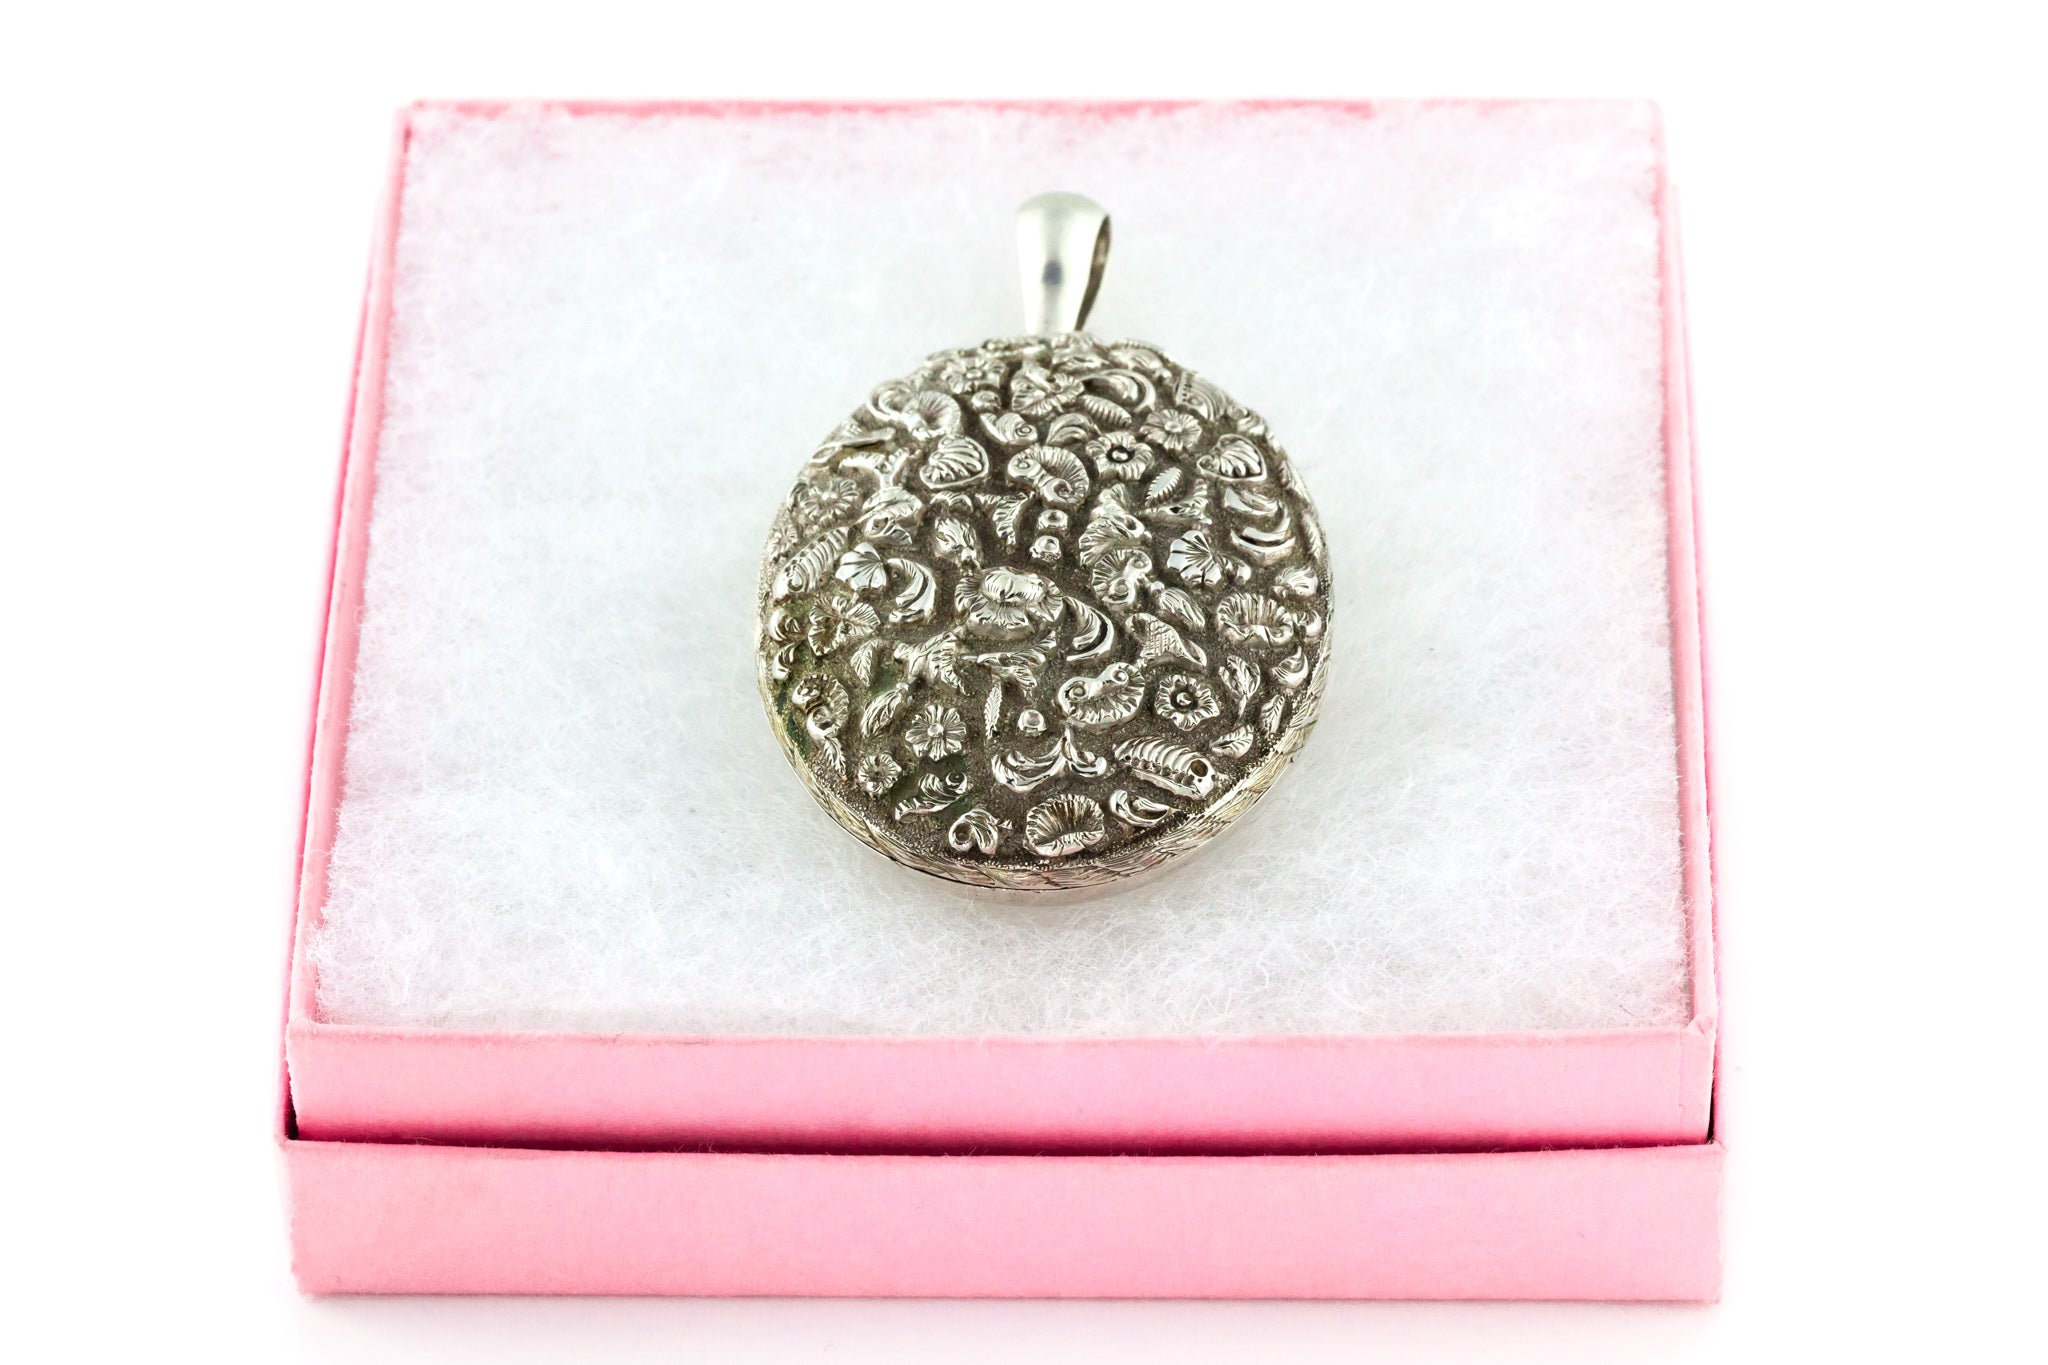 Antique Silver Locket with Shells and Flowers (22.3g) – Lillicoco